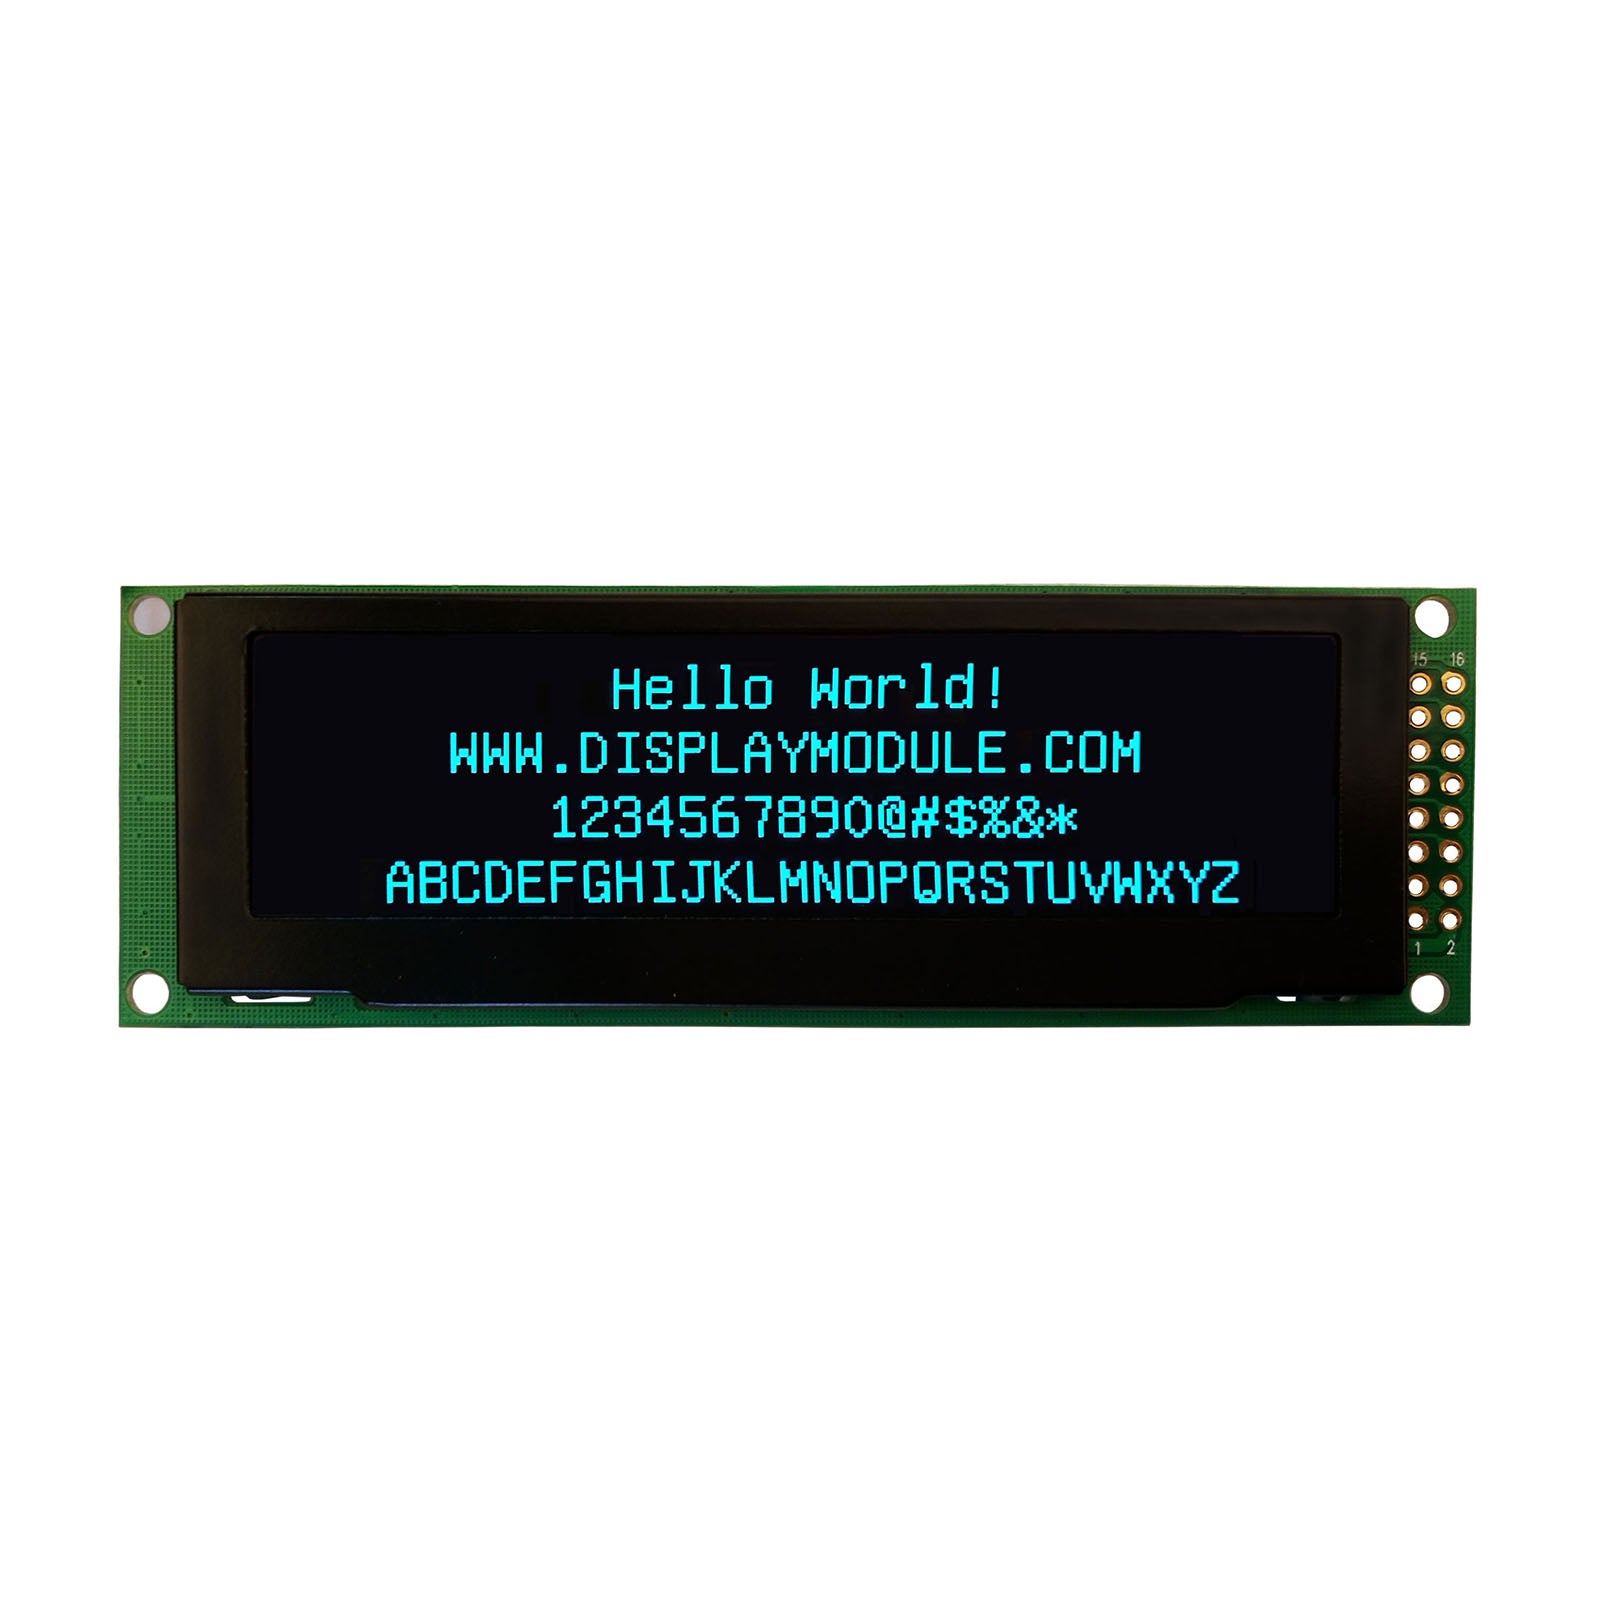 3.2 inch 256x64 blue OLED screen displaying the text 'Hello World!'